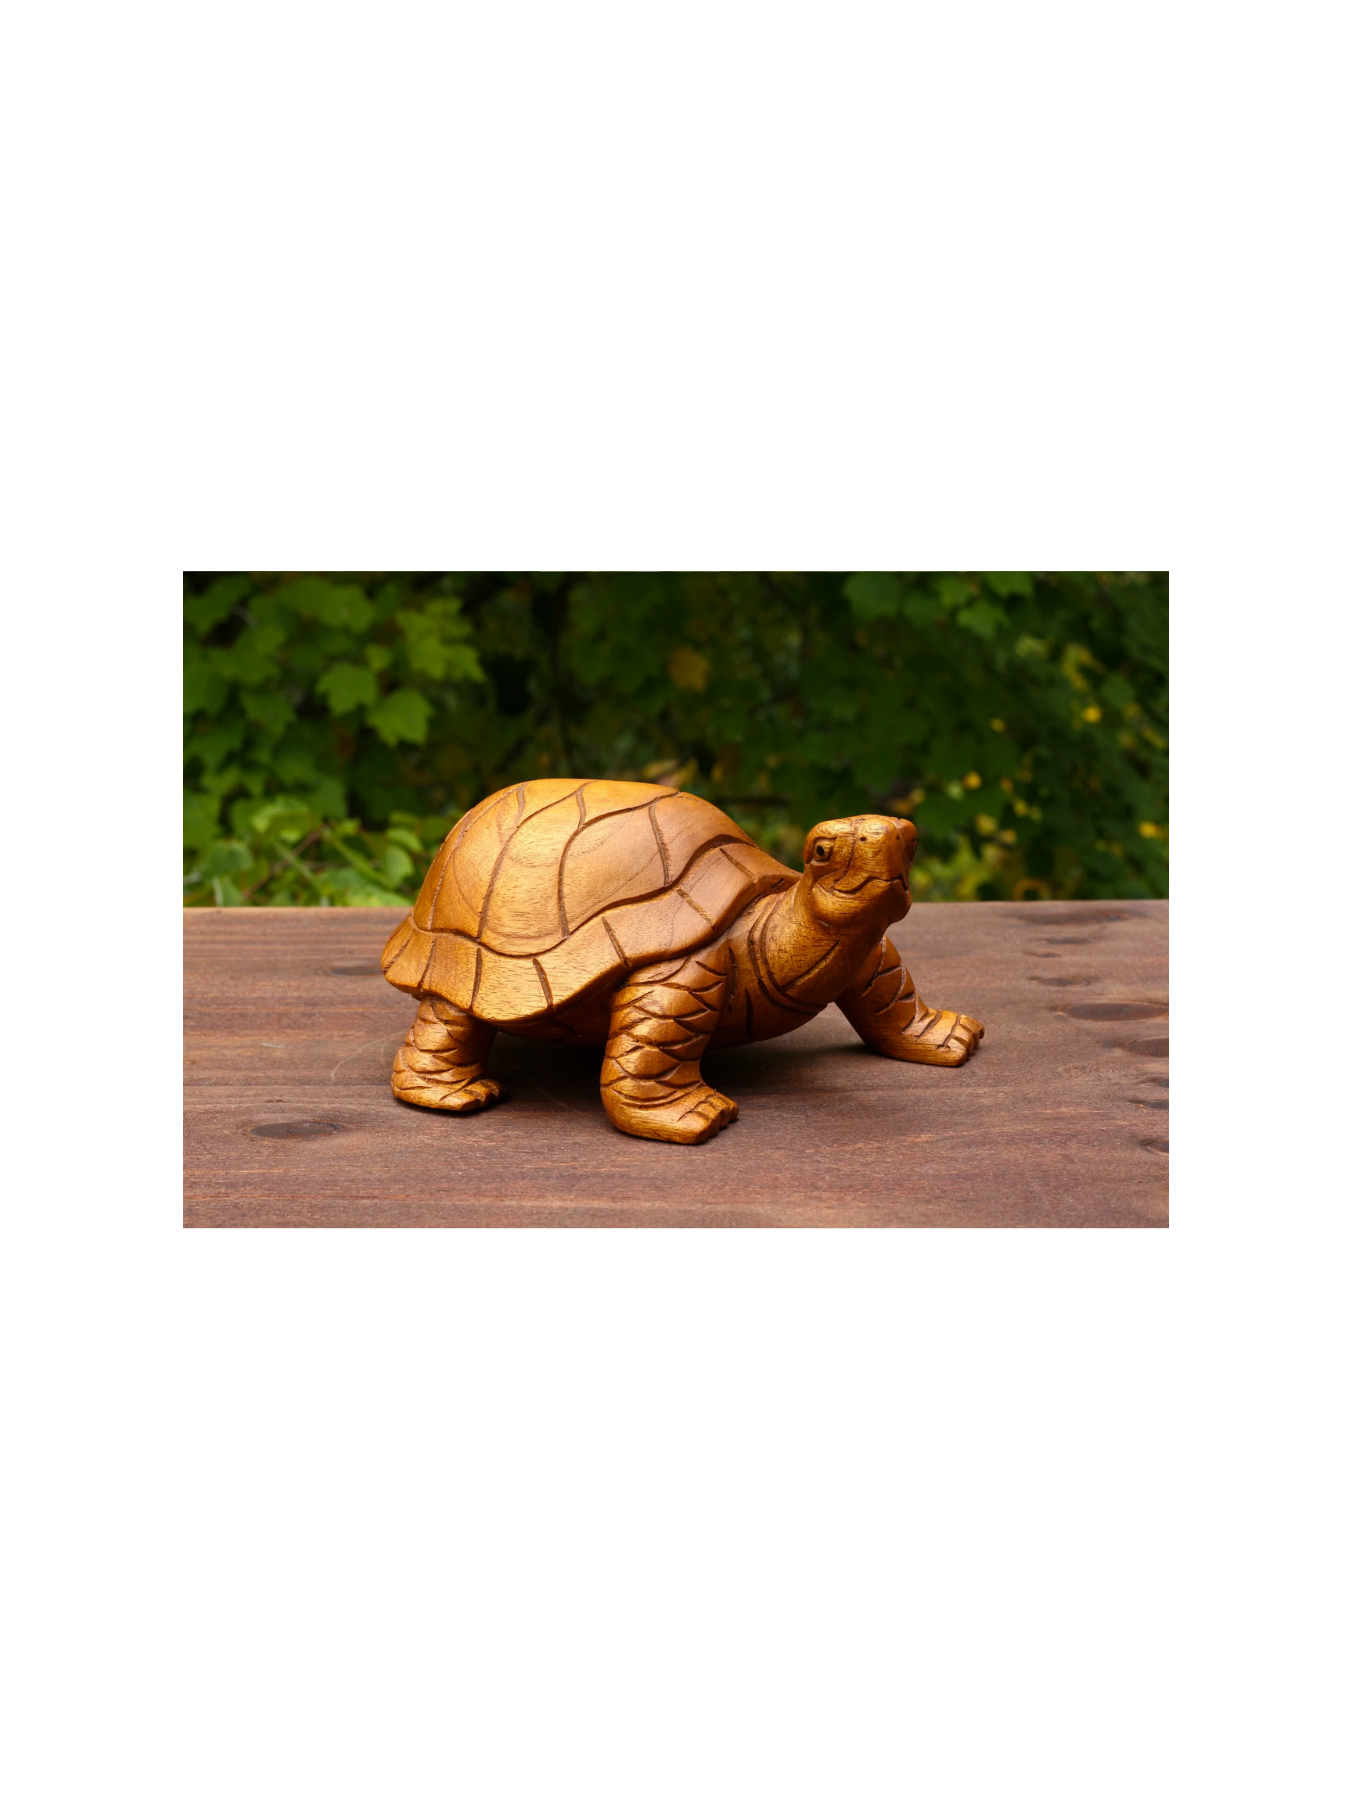 Wooden Walking Tortoise Turtle Statue Hand Carved Sculpture Wood Home Decor Accent Figurine Handcrafted Handmade Seaside Tropical Nautical Coastal